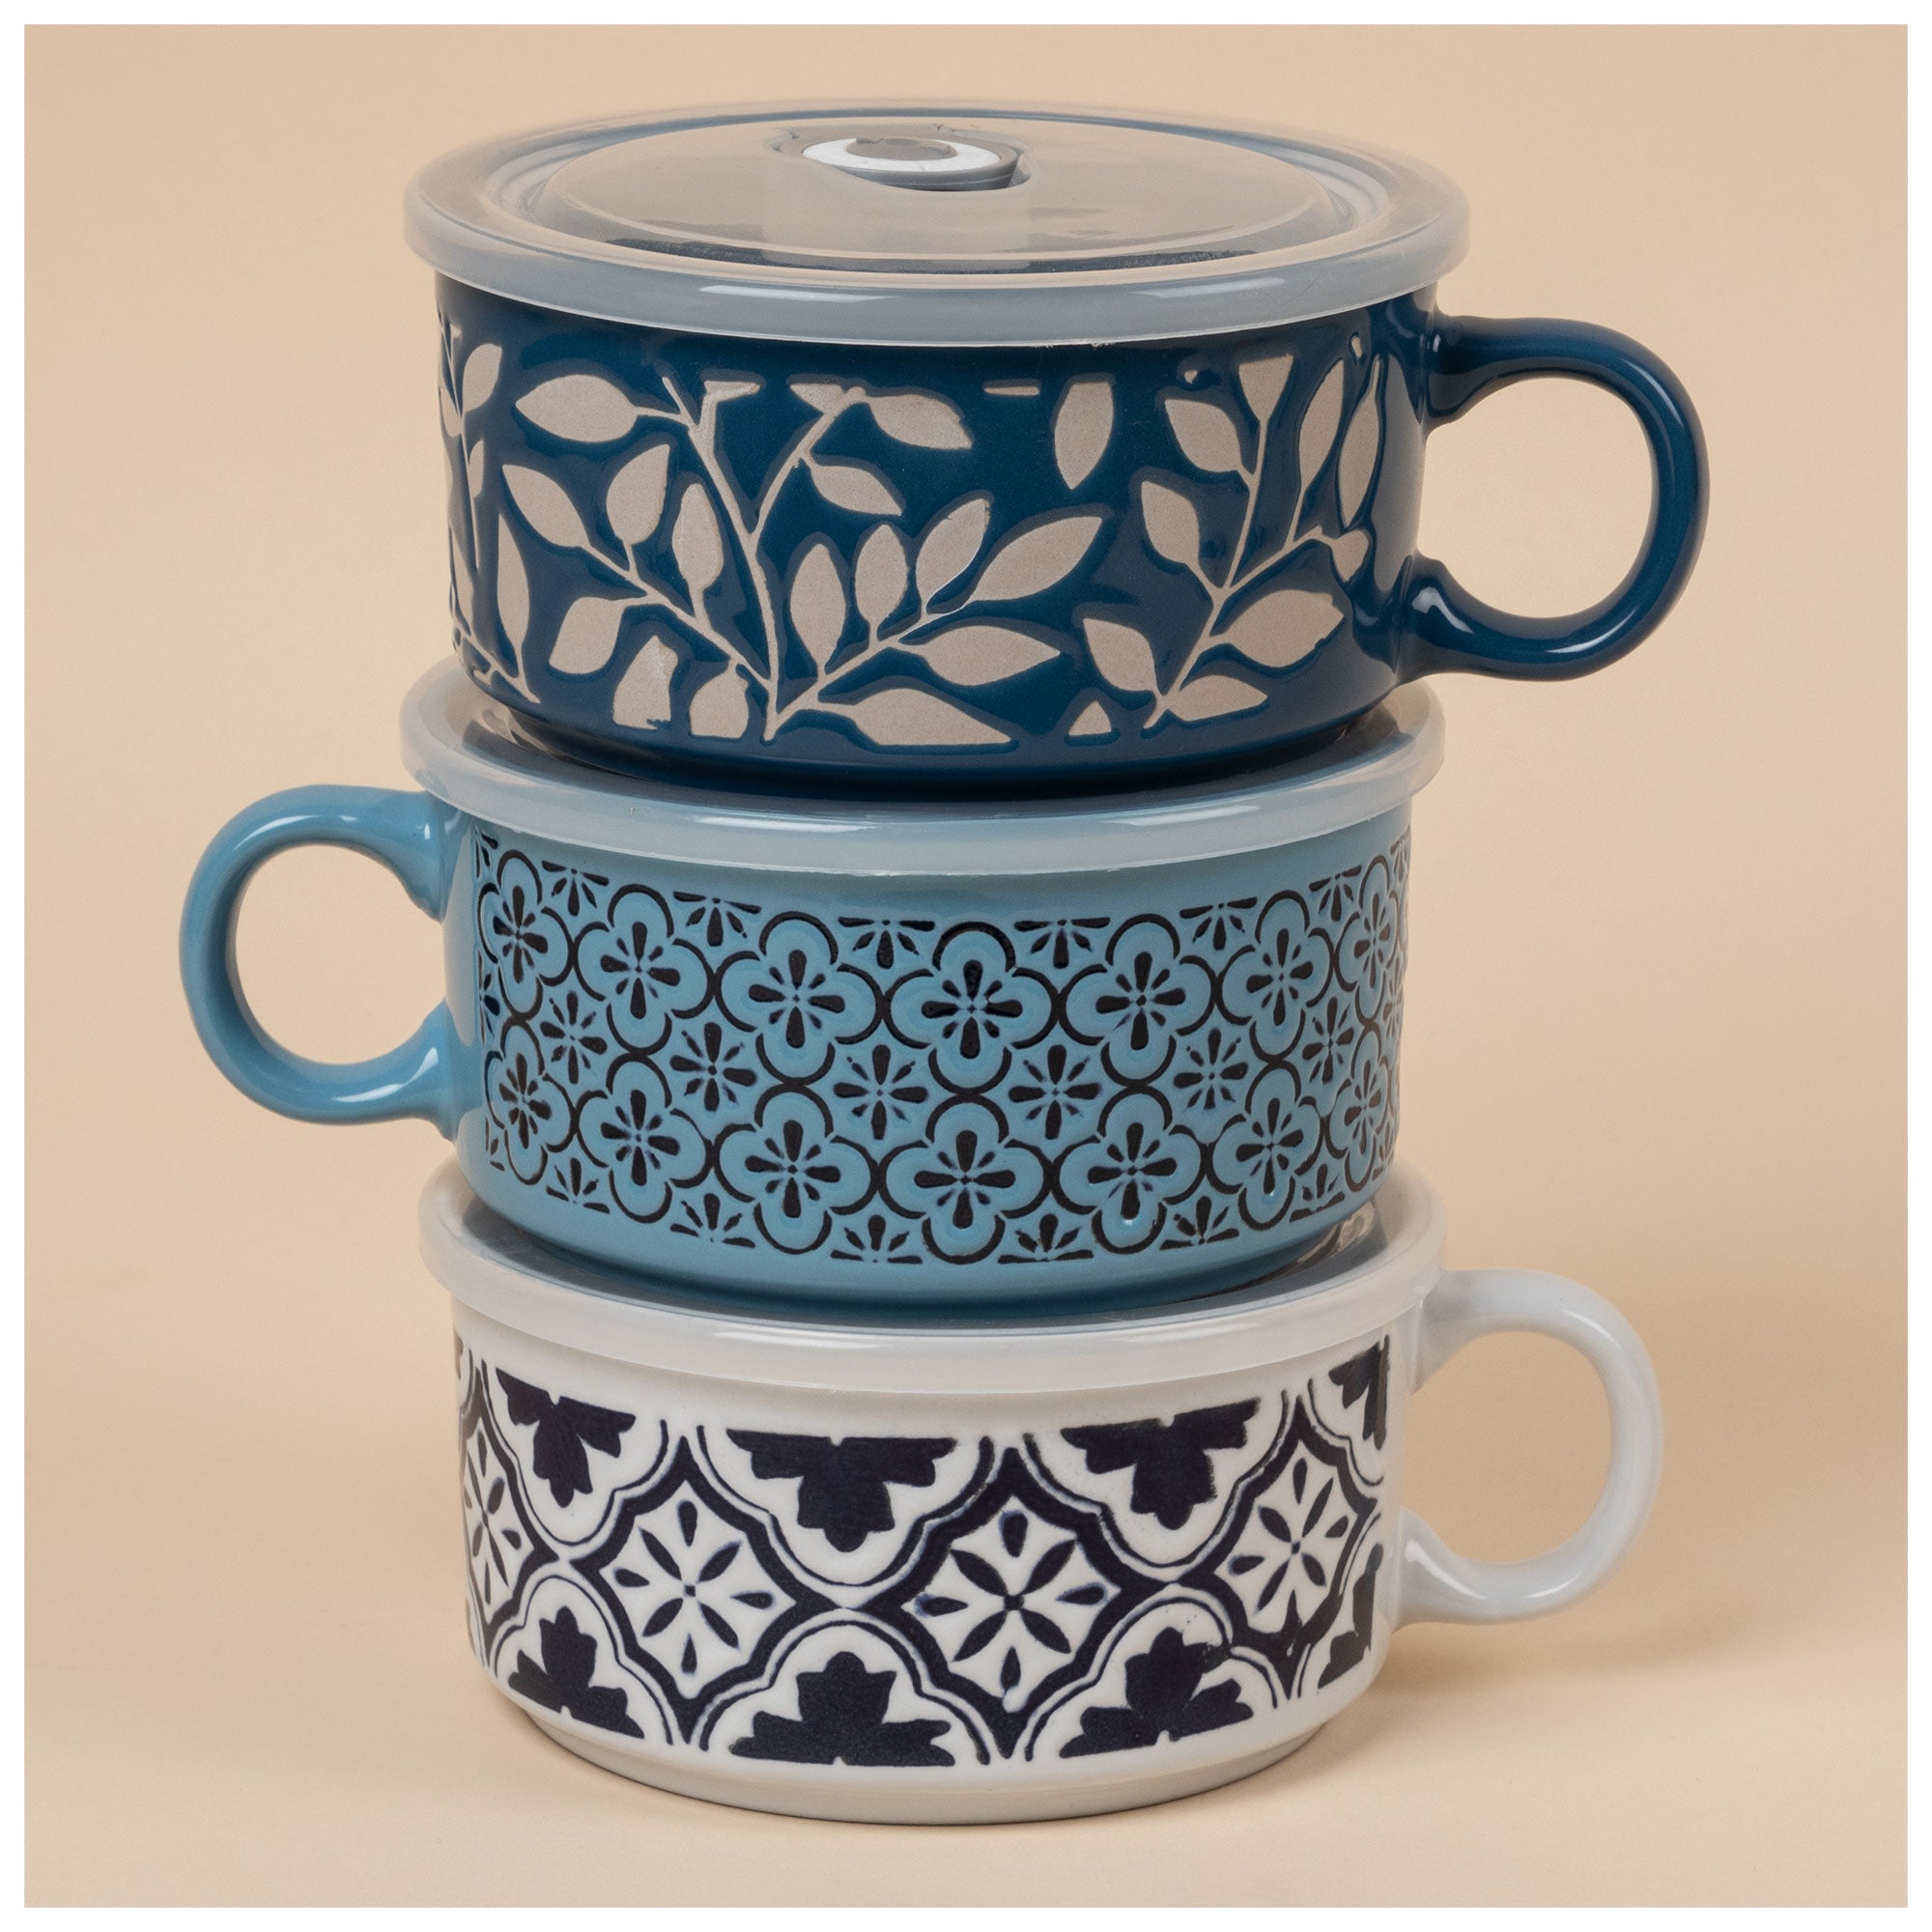 Lovely Blue Souper Mug With Lid - Blue Floral Checkers